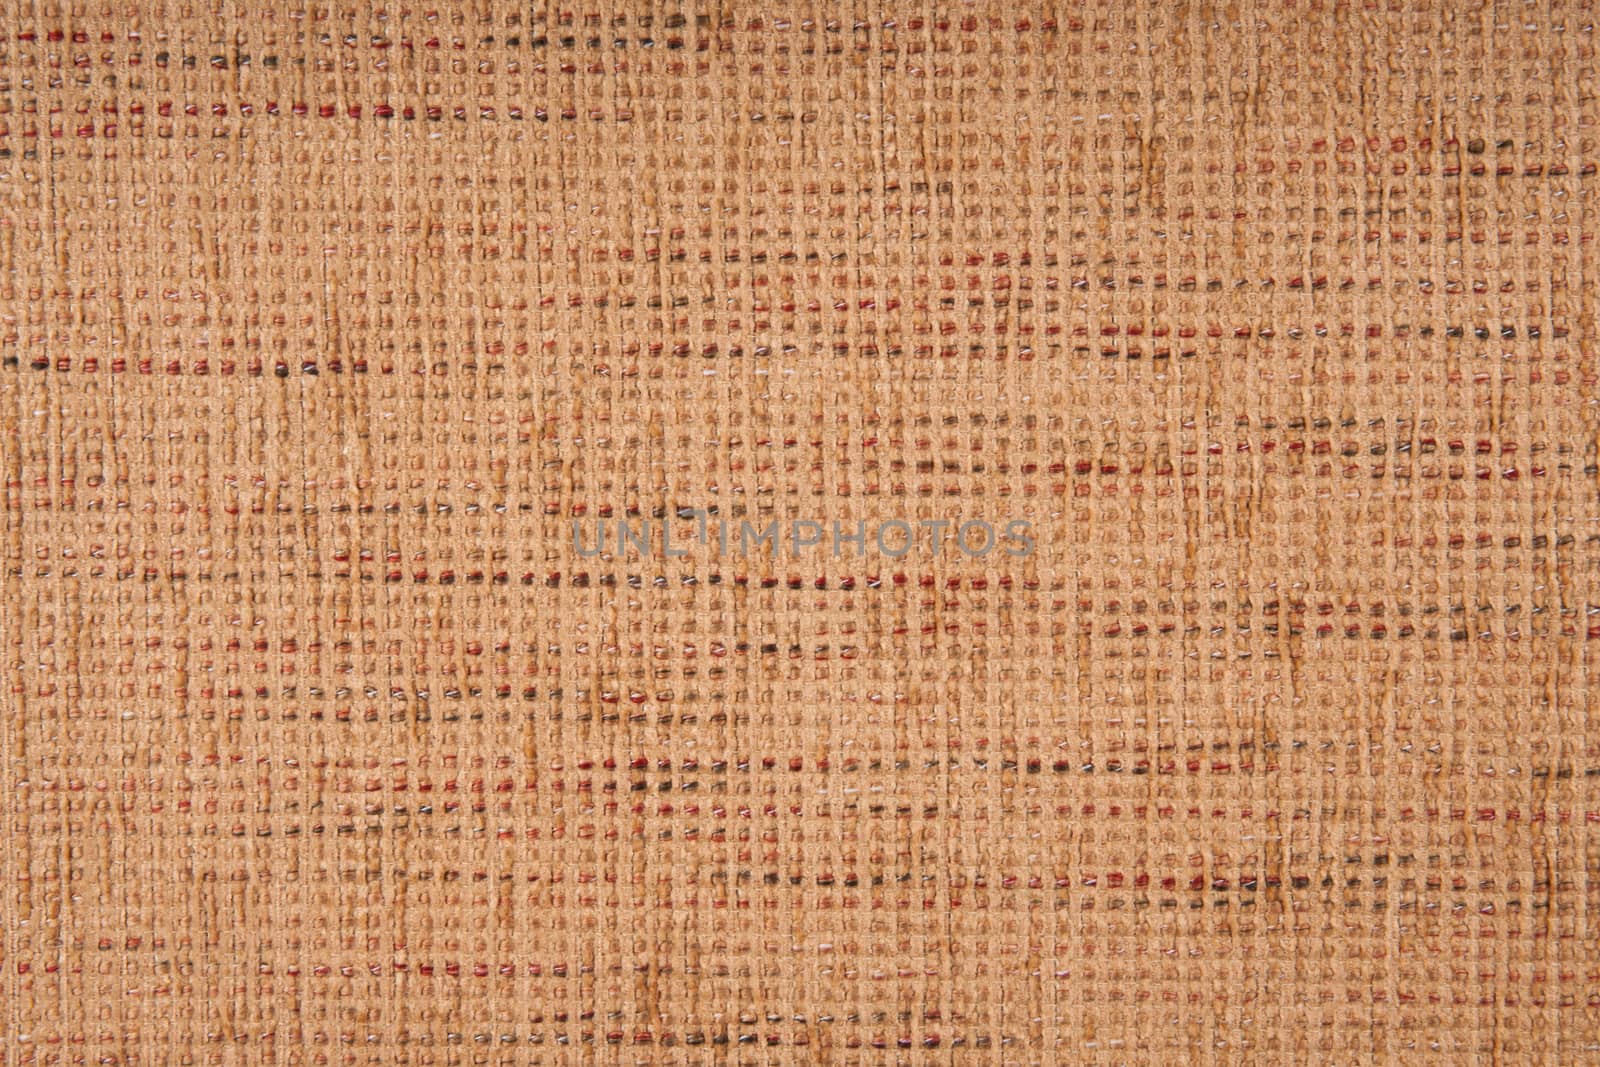 brown fabric texture background